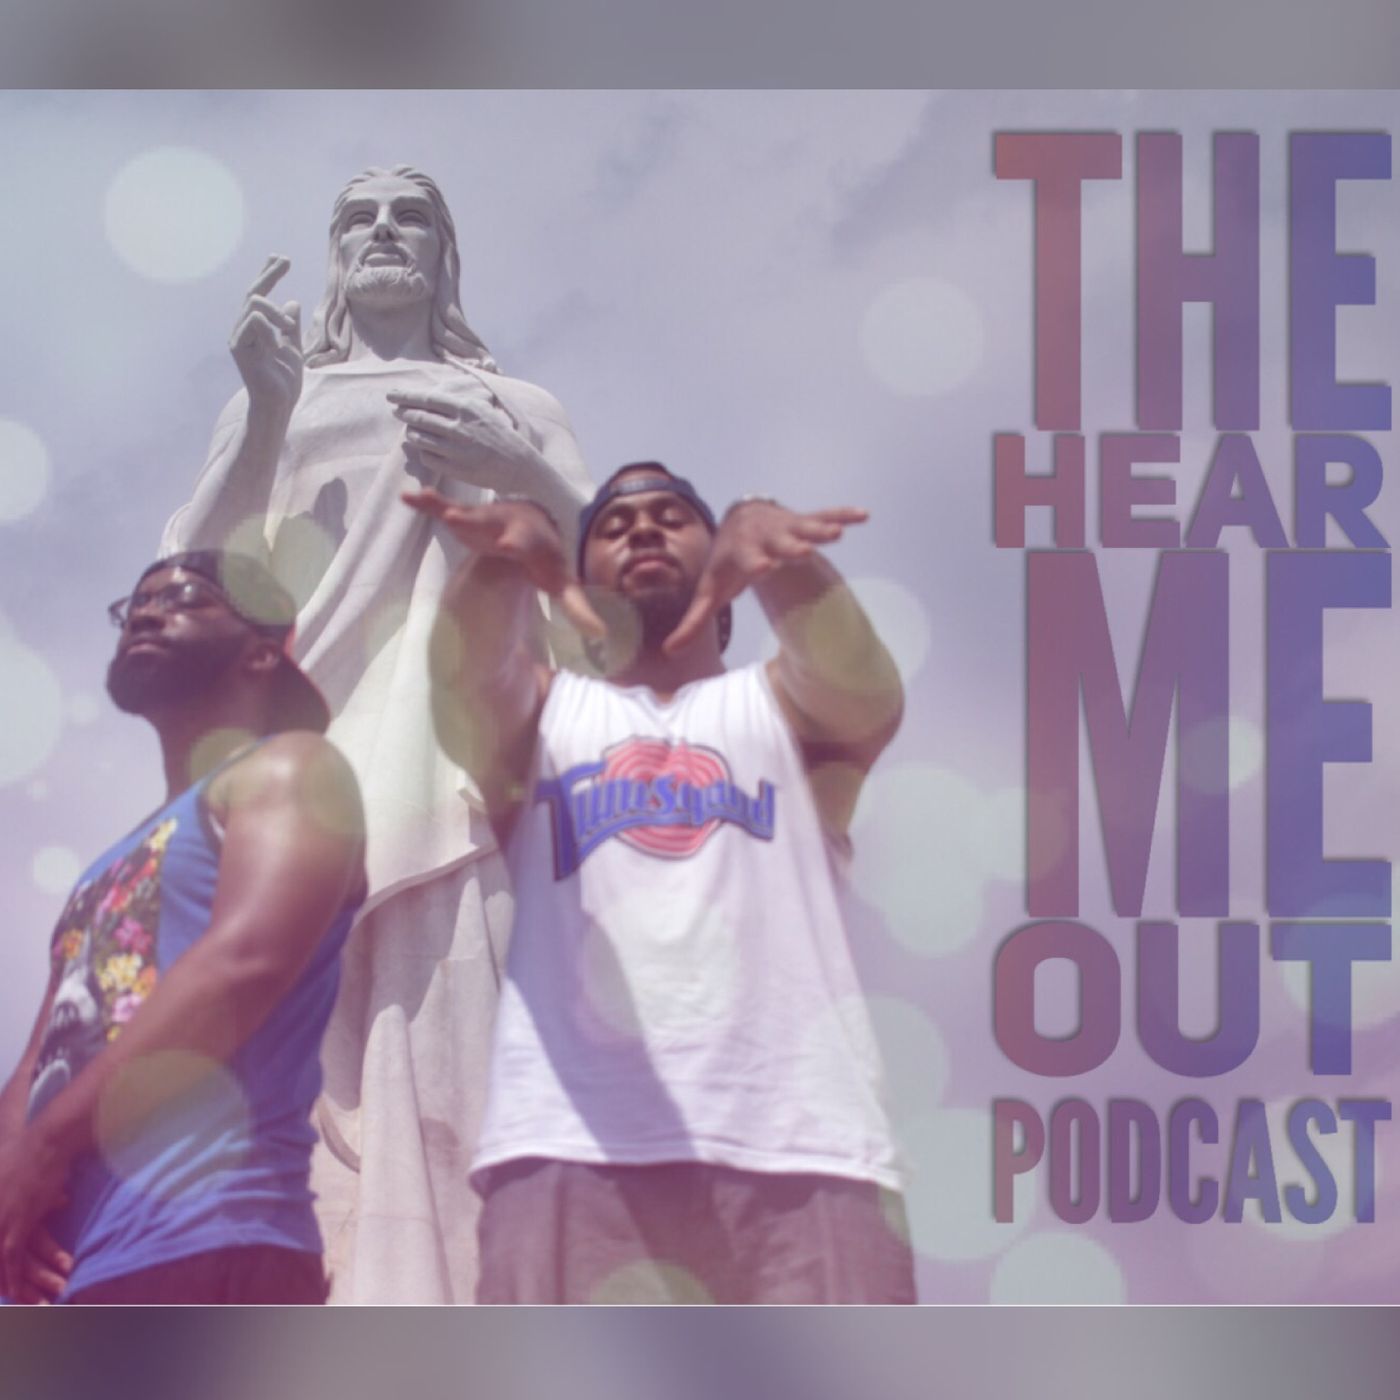 Hear Me Out Podcast